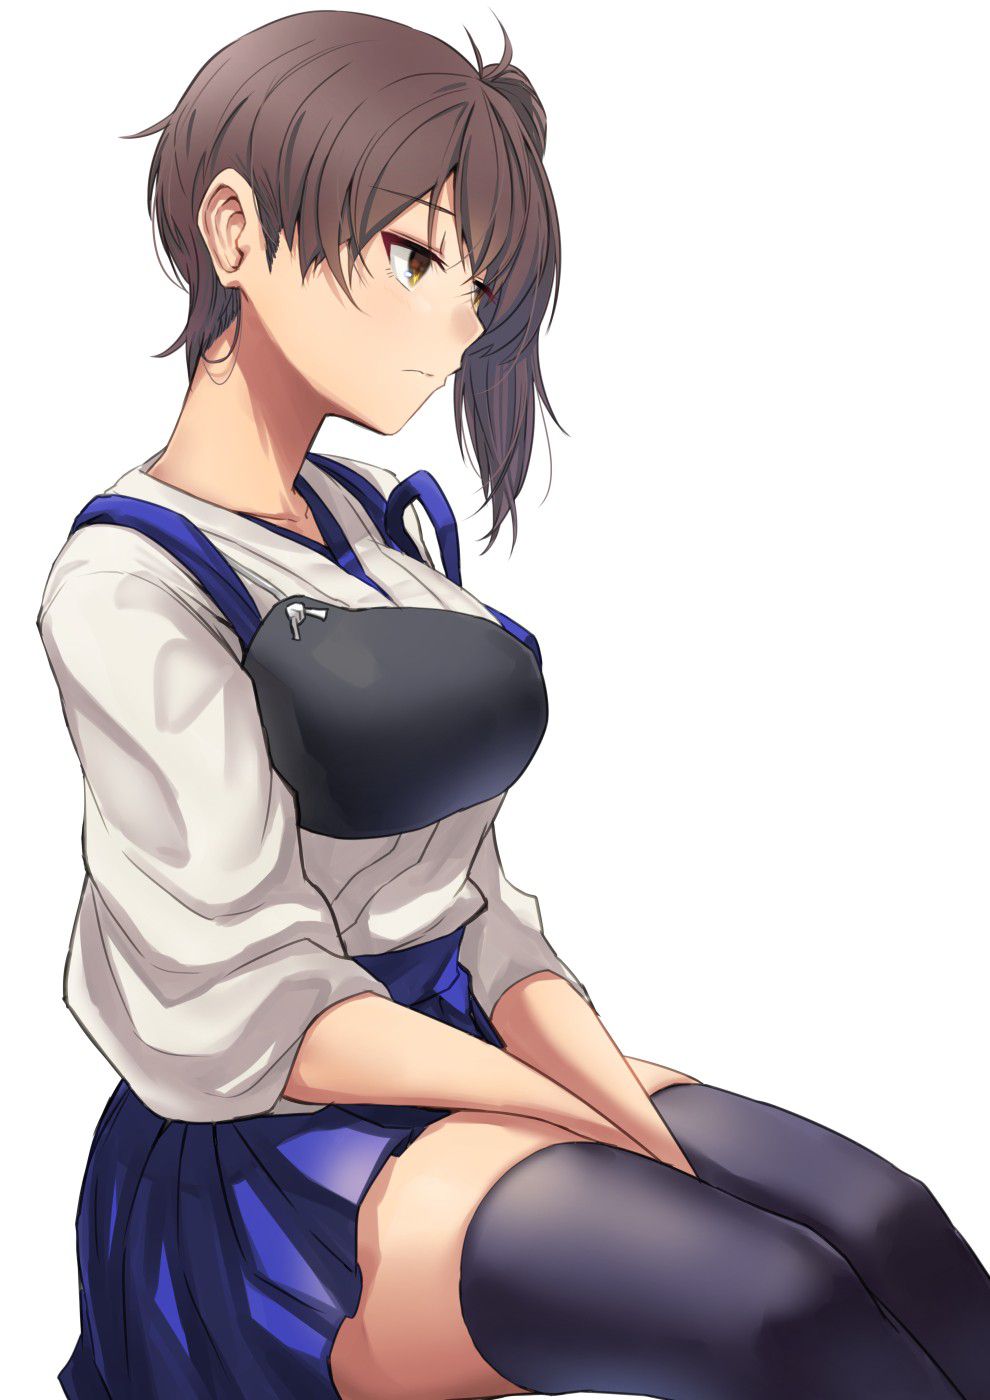 Two-dimensional erotic image w packed with various things anyway, such as Kaga's full body and of the ship this 8